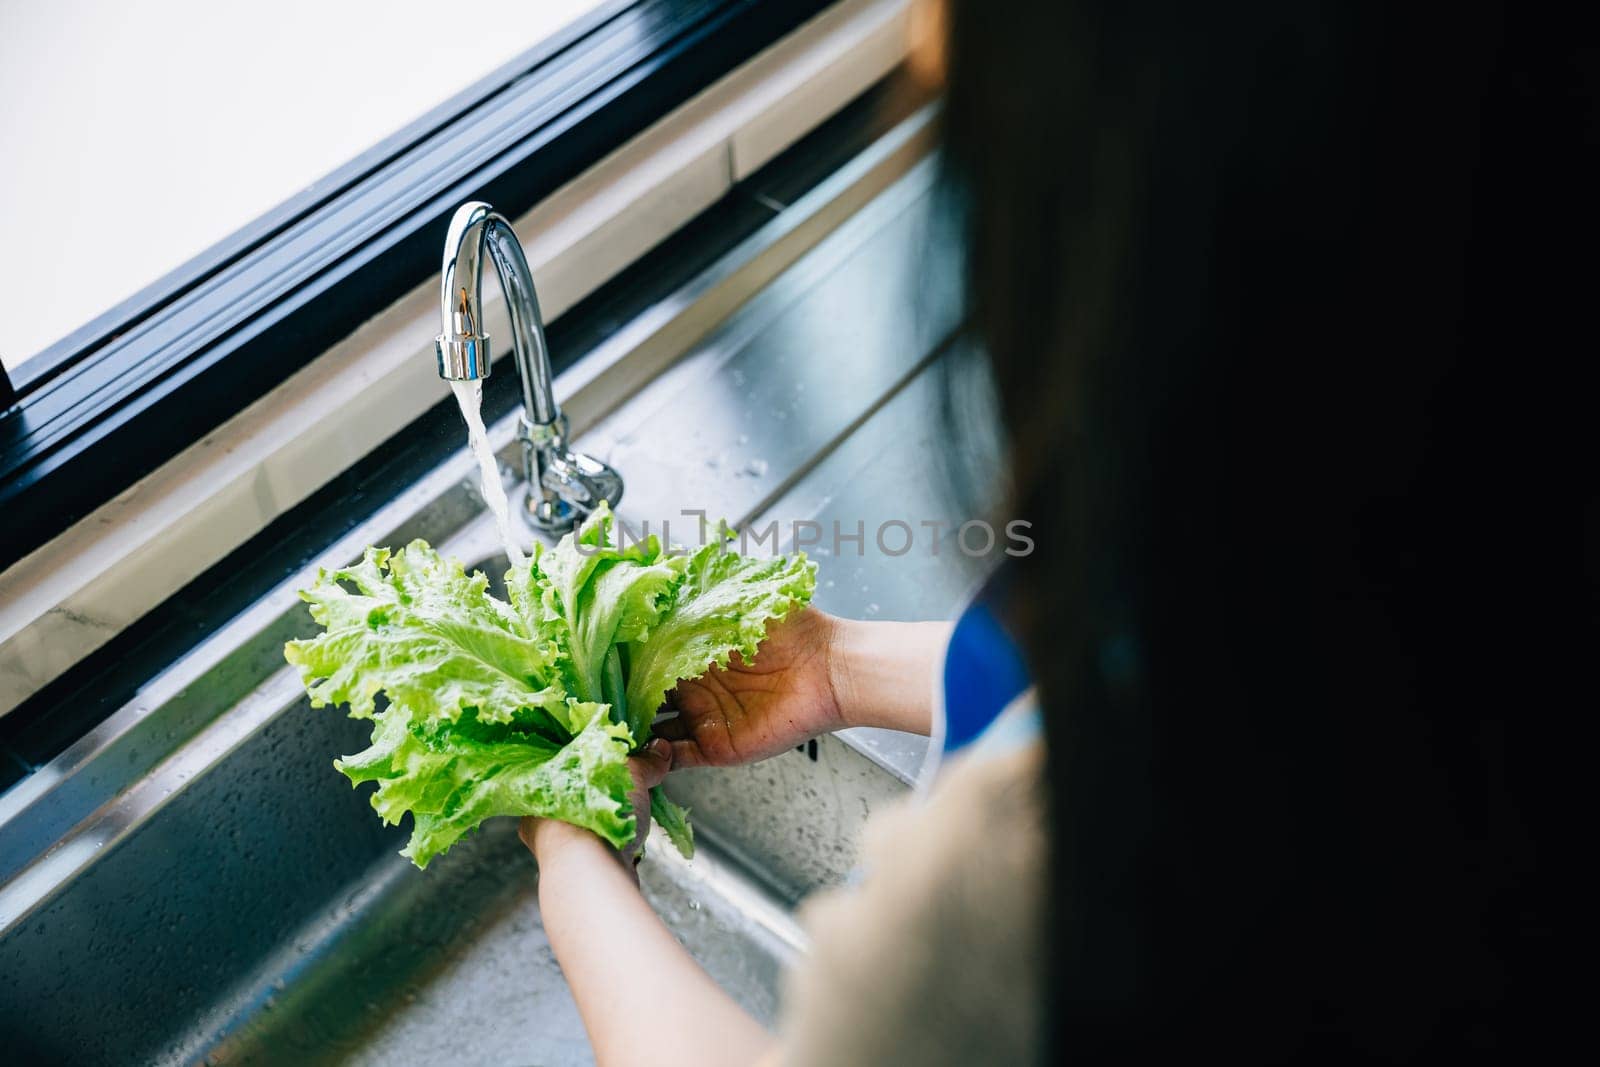 A woman's hands washing fresh vegetables under running water in a modern kitchen sink for a vegan salad preparation. Emphasizing hygiene and clean eating habits at home.